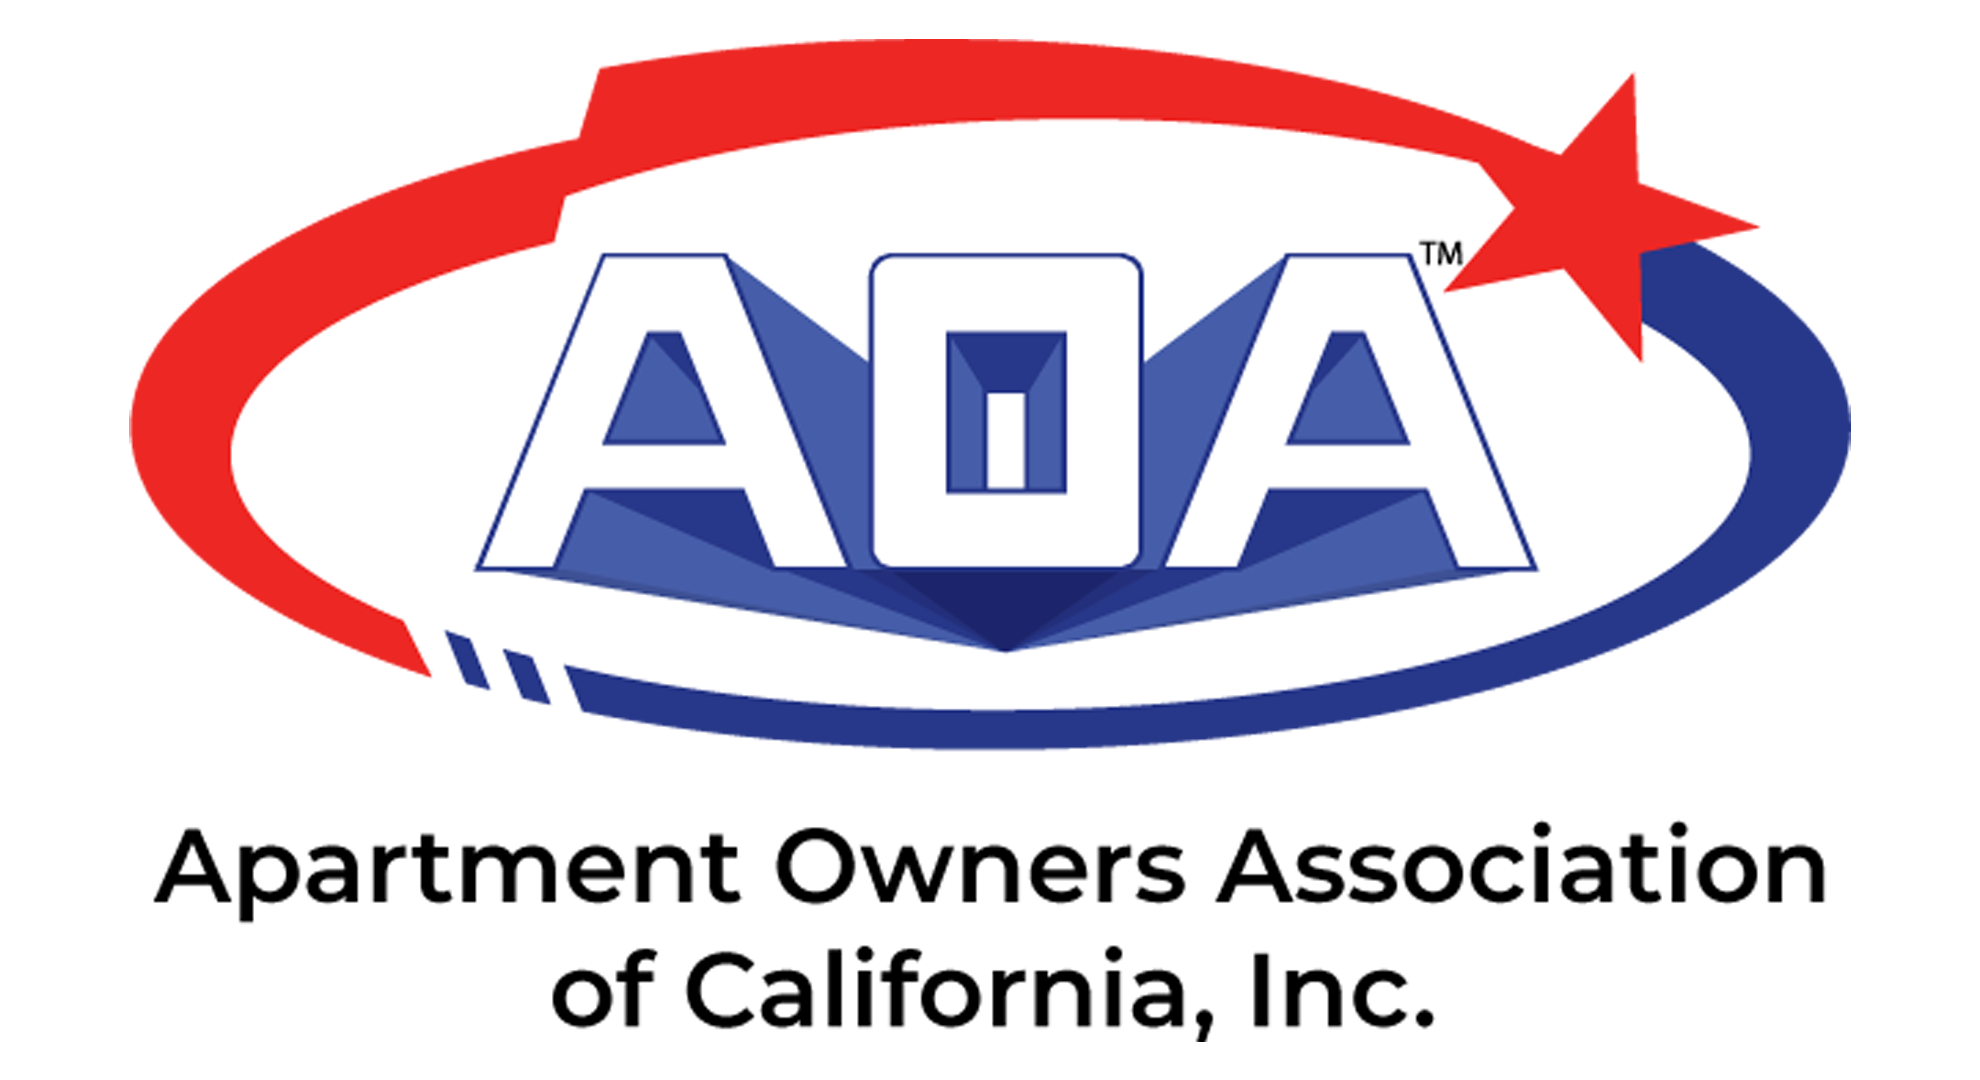 More Info for Apartment Owners Association of California Million Dollar Trade Show & Landlording Conference